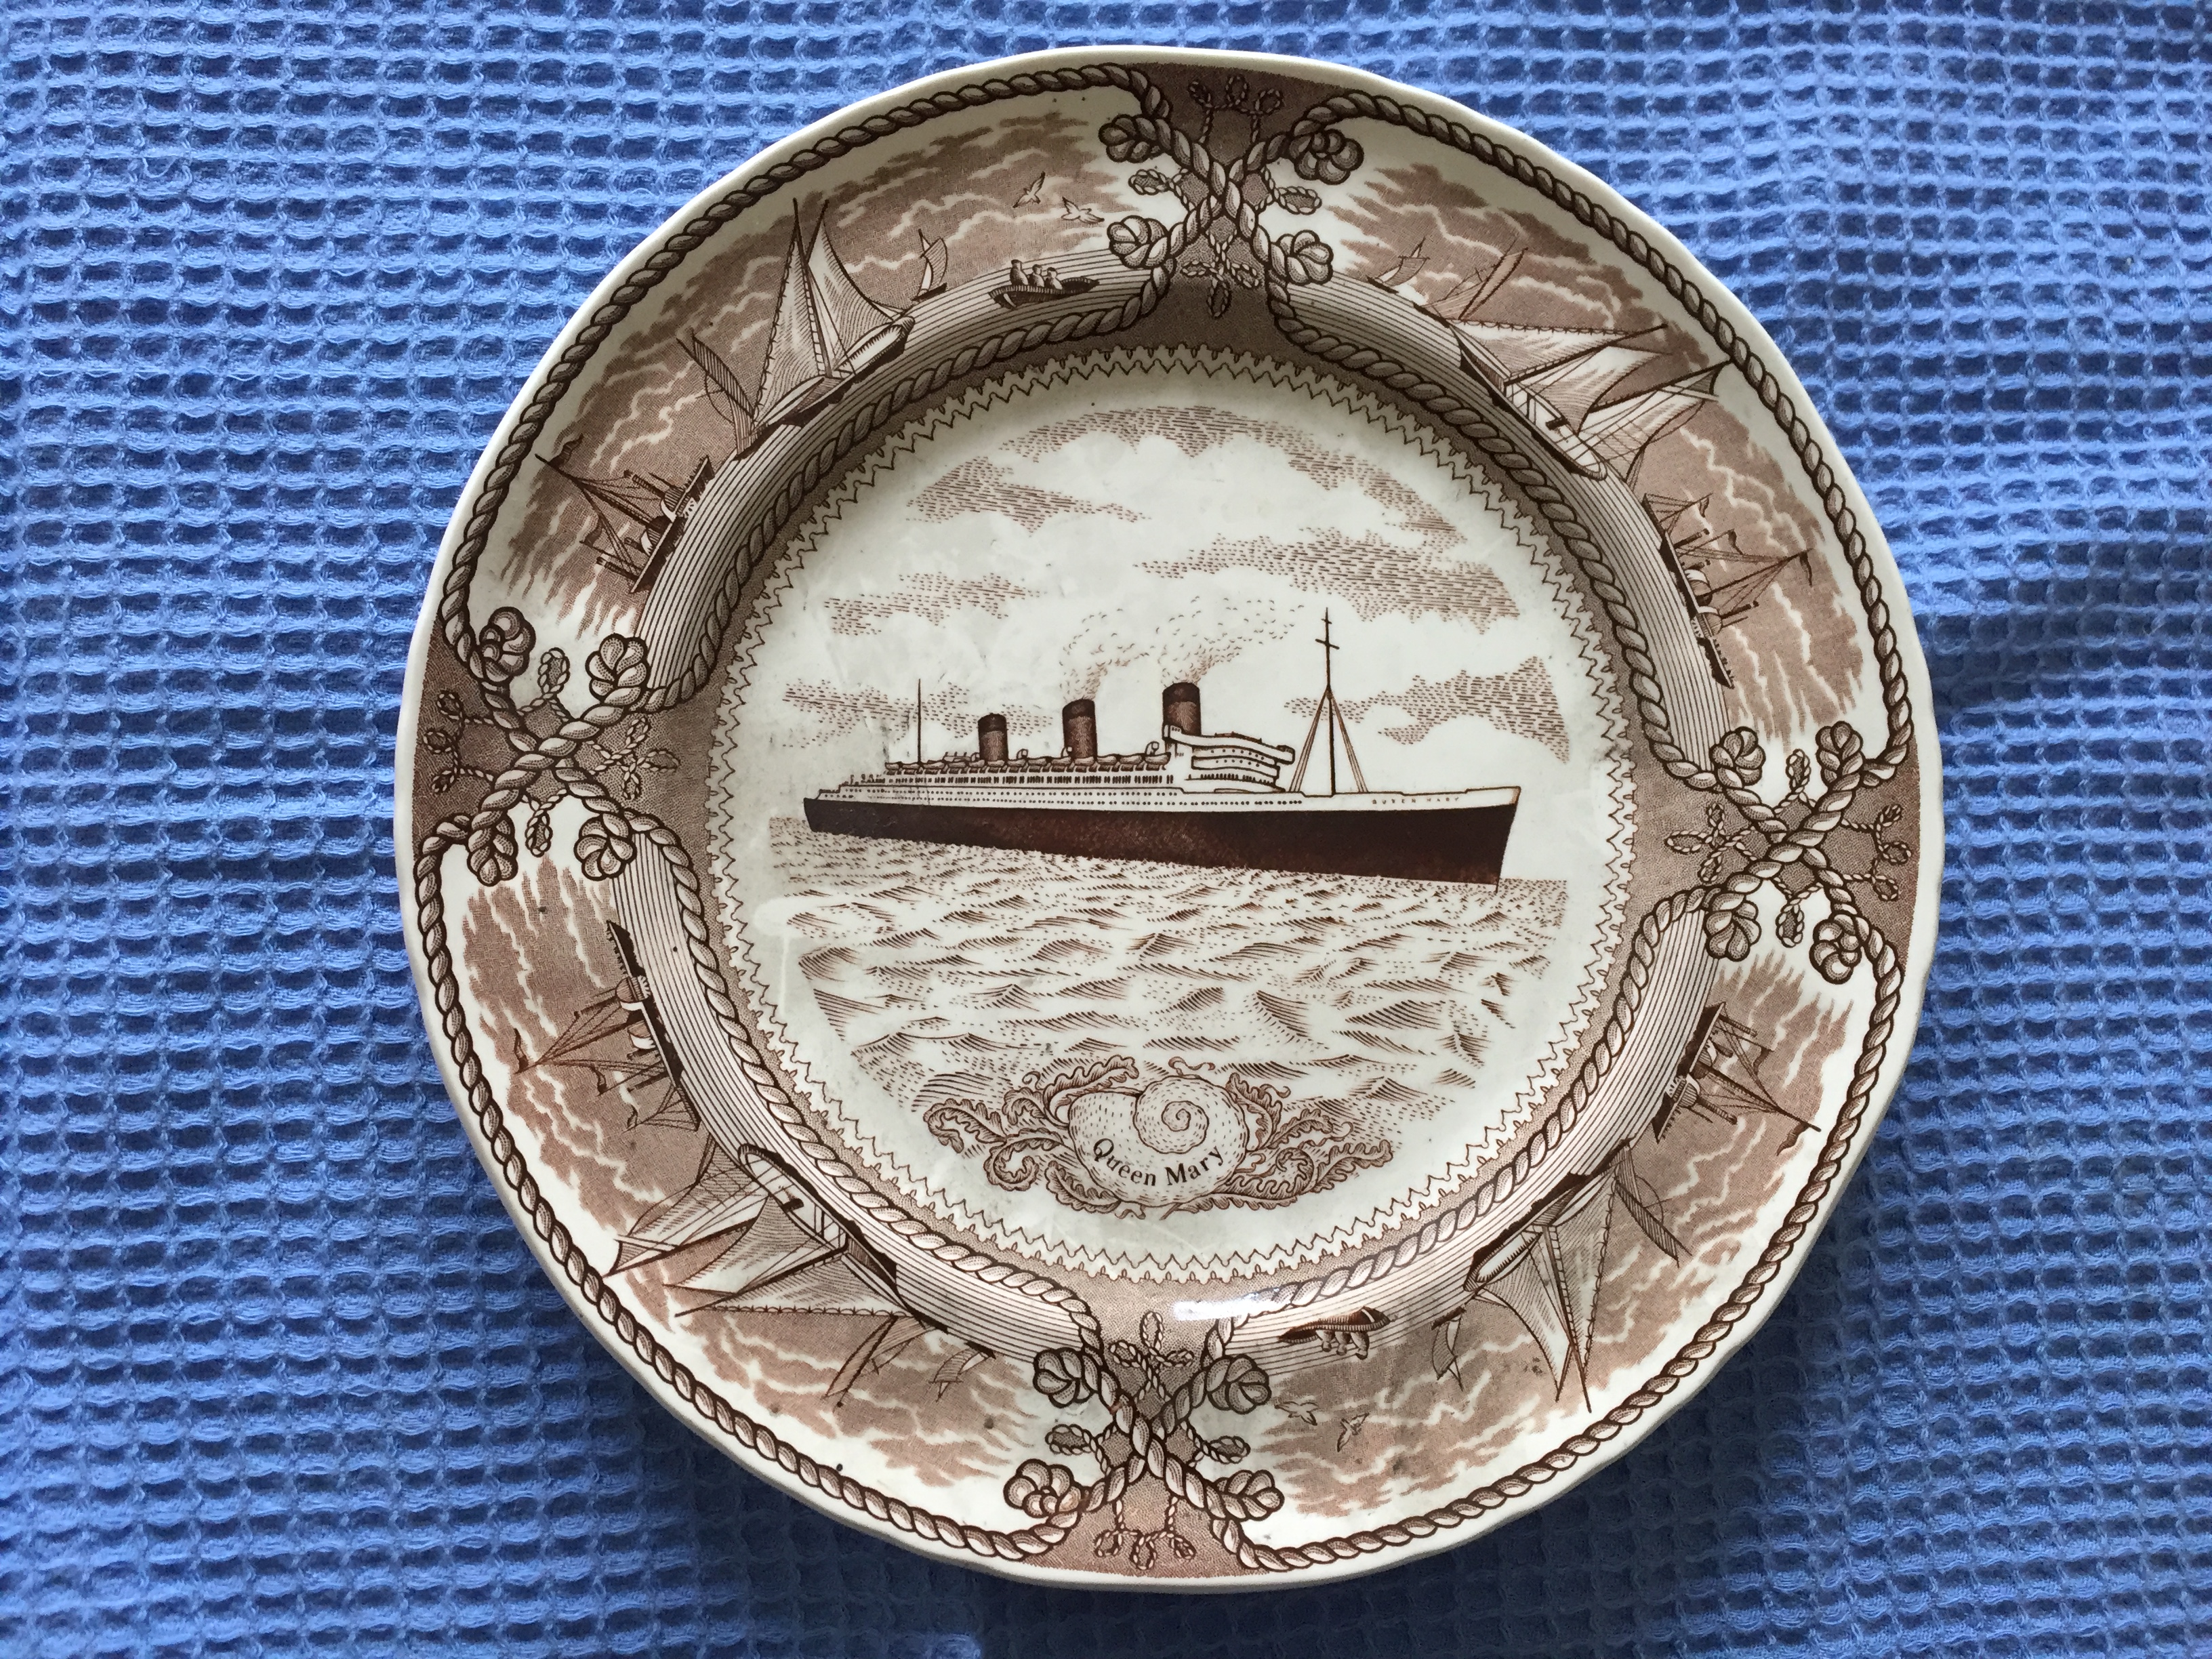 VERY RARE TO FIND SOUVENIR PLATE OF THE RMS QUEEN MARY